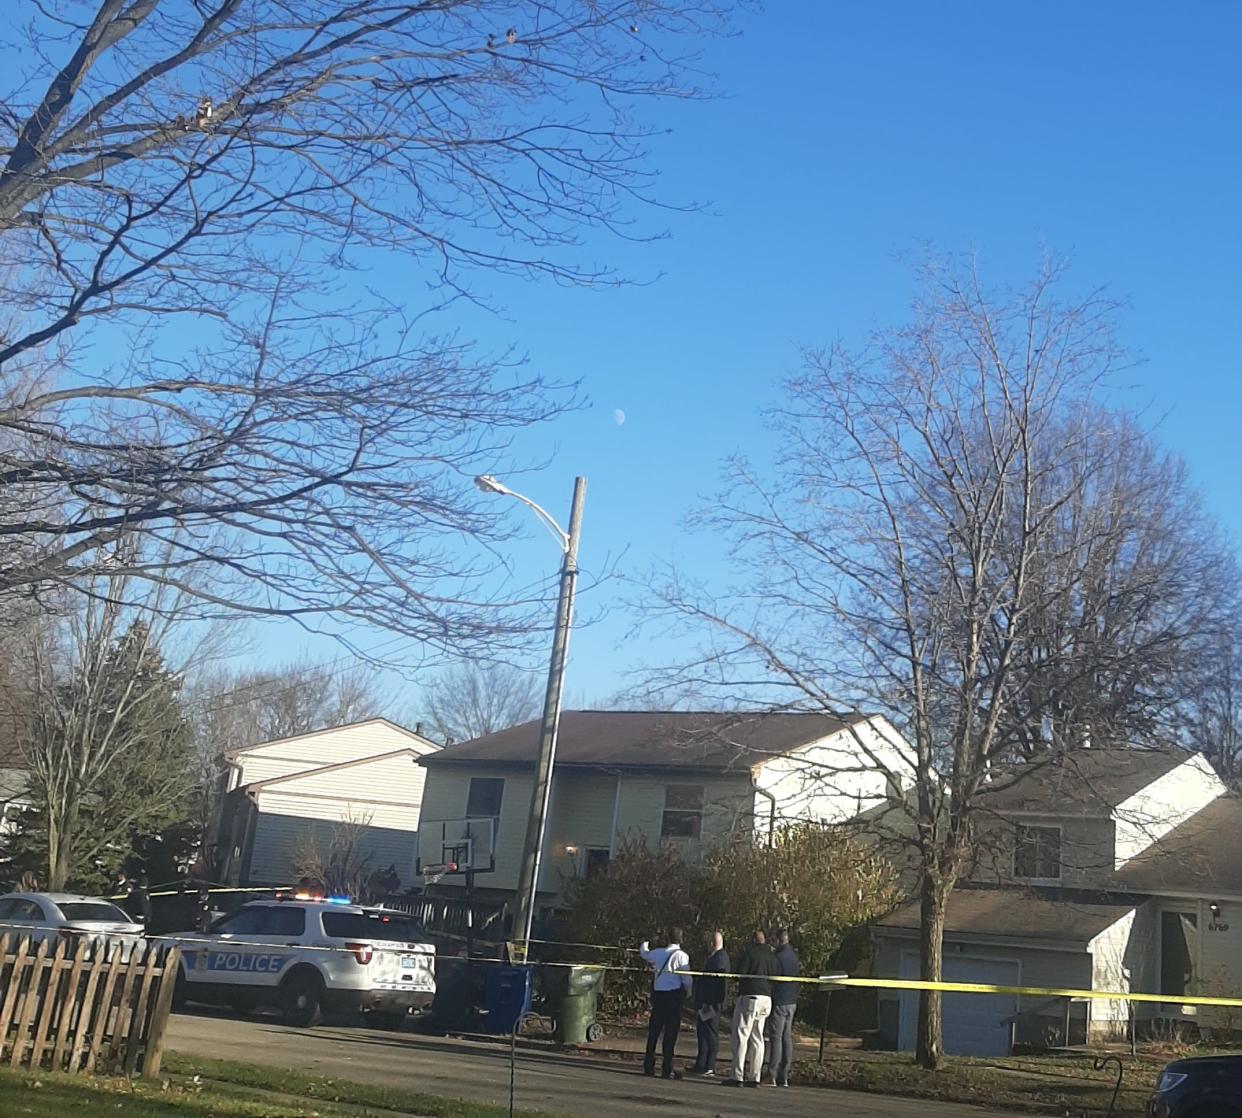 Columbus police say a man was shot to death Sunday afternoon inside a house on the 6700 block of Alexdon Court on the city's Southeast Side. The death was the city's record 189th homicide of 2021